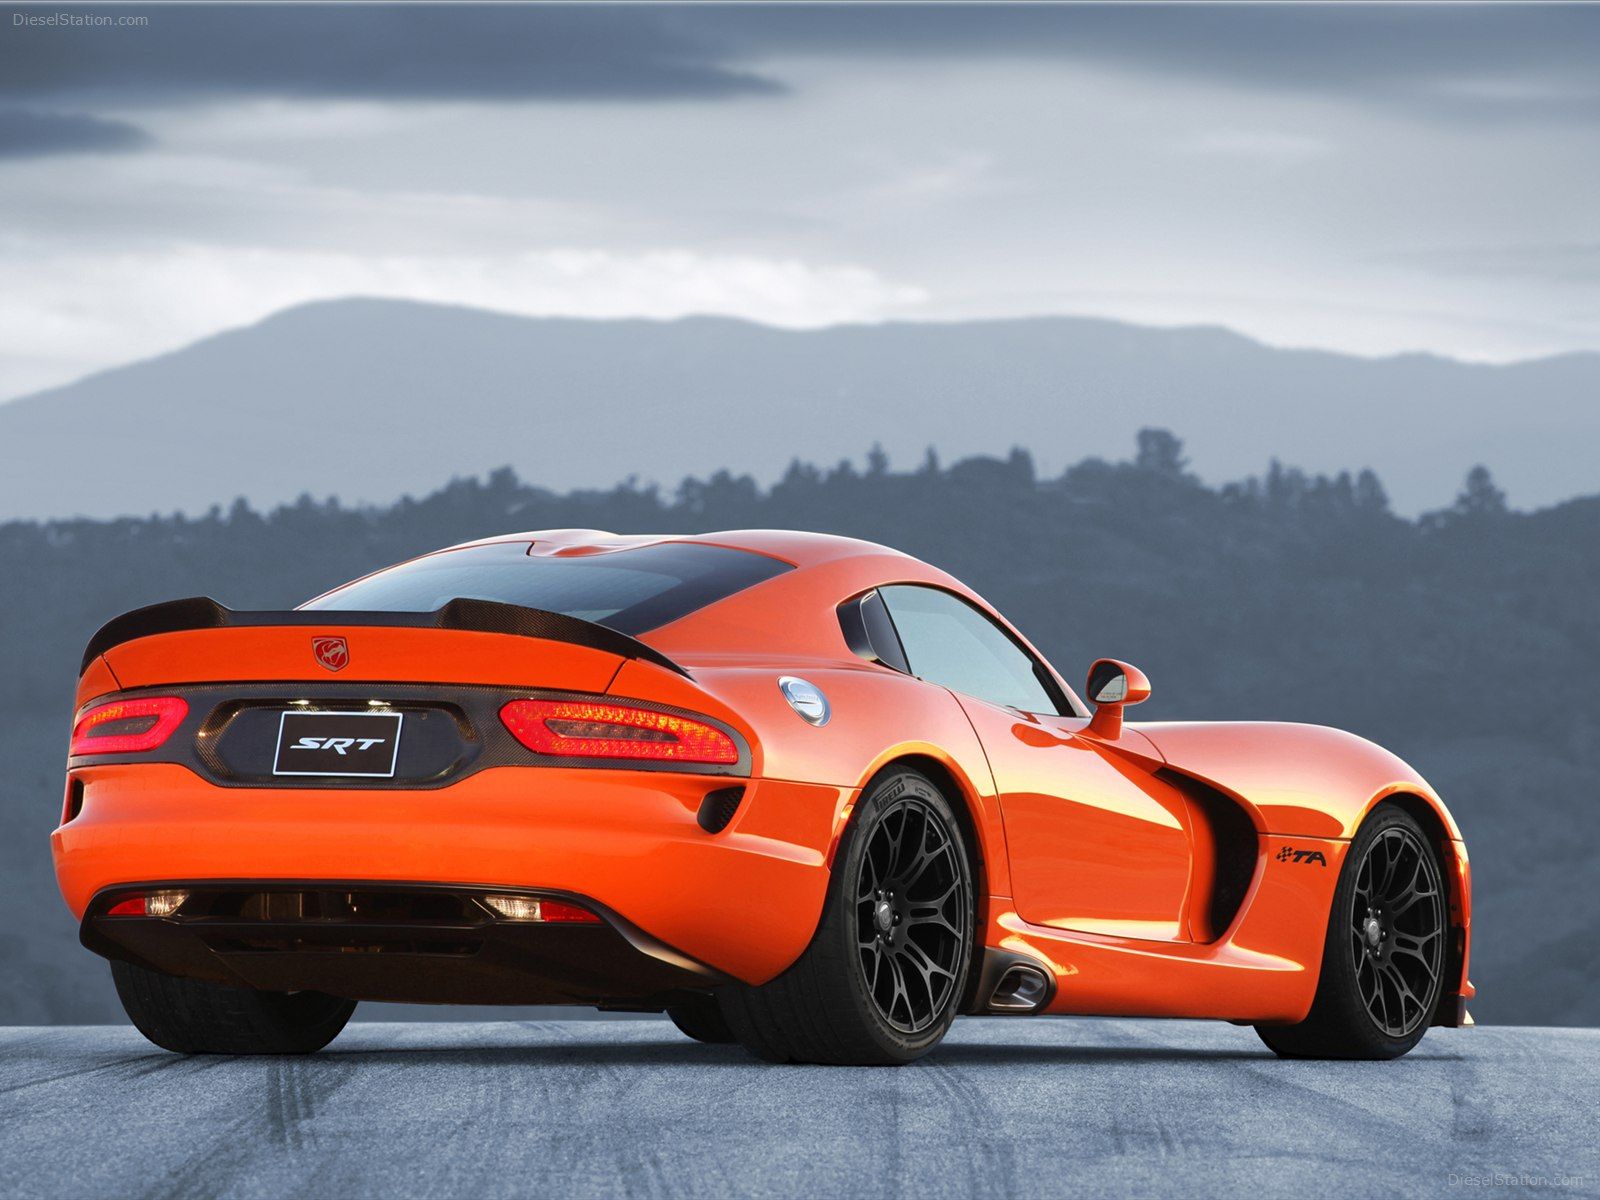 SRT Dodge Viper with mountain view